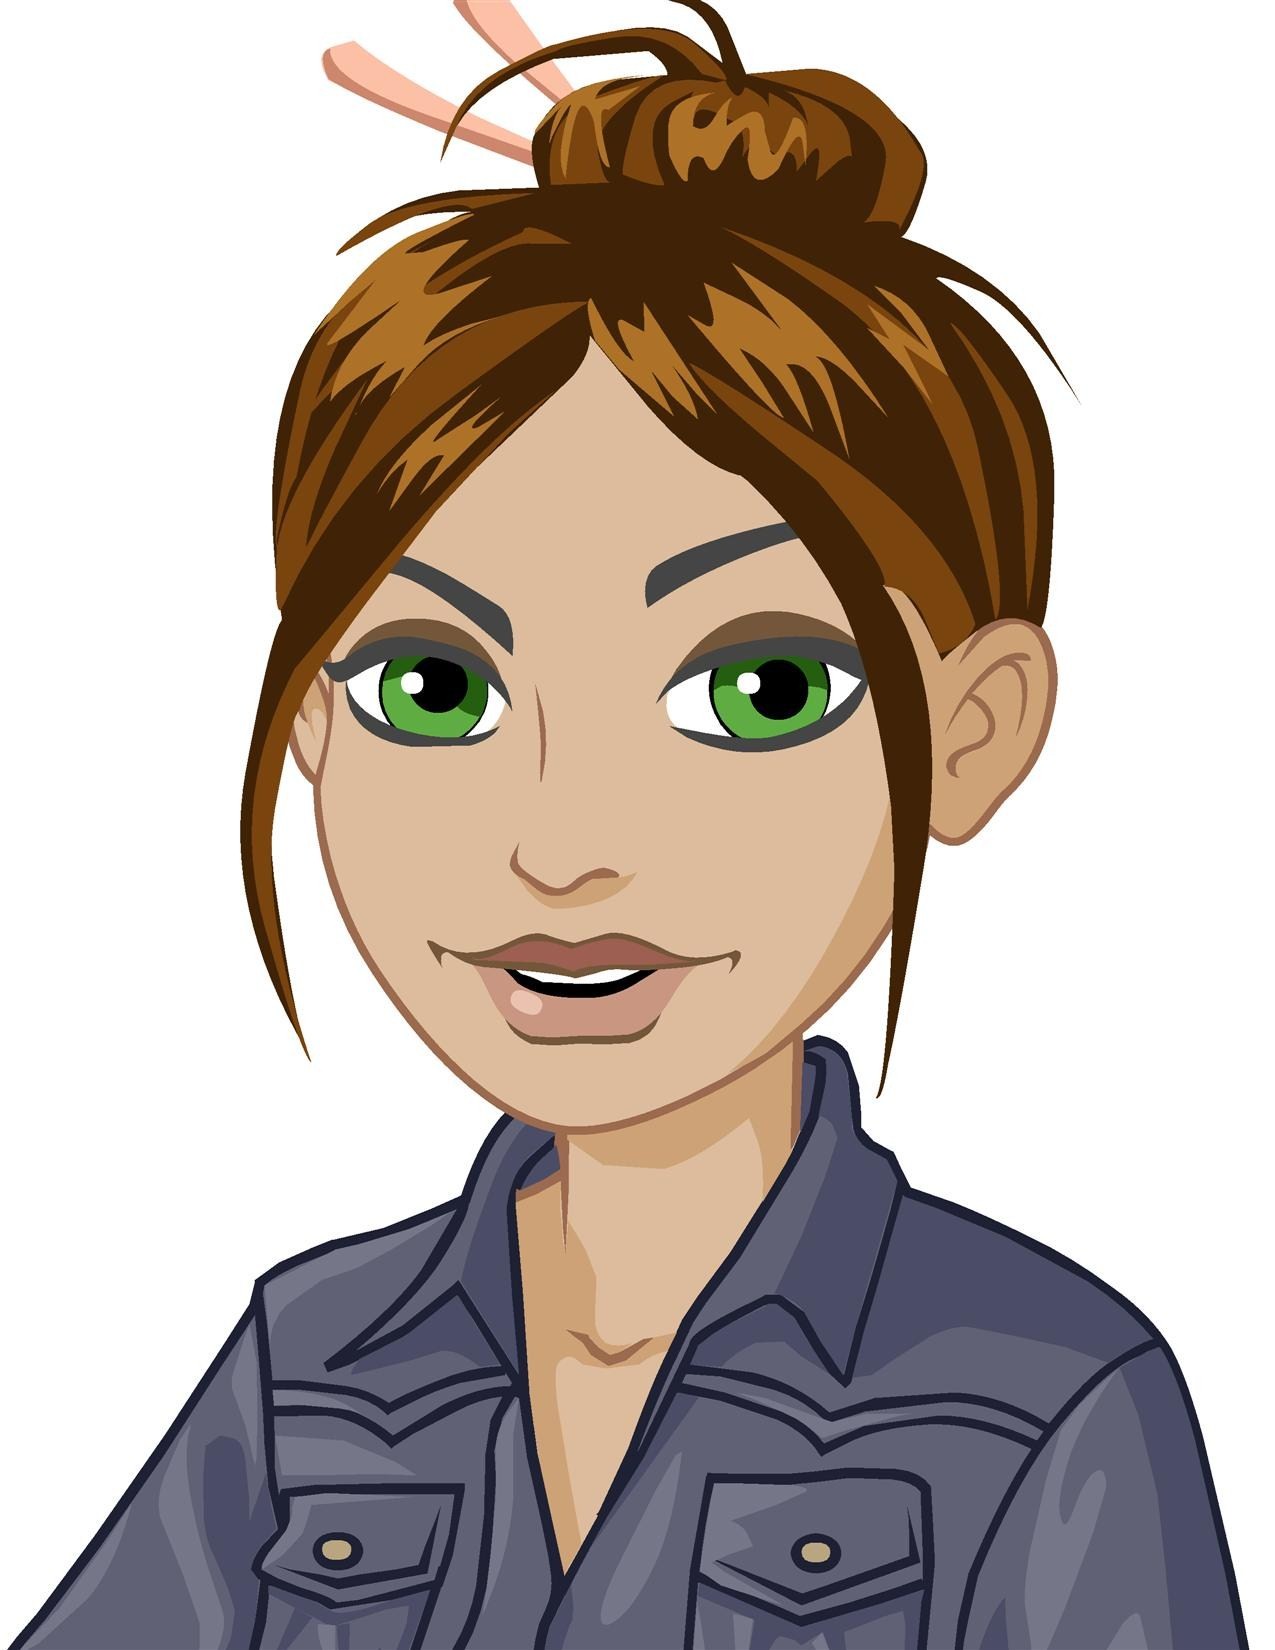 This is what I would look like if I were a cartoon.
Please add to my profile.